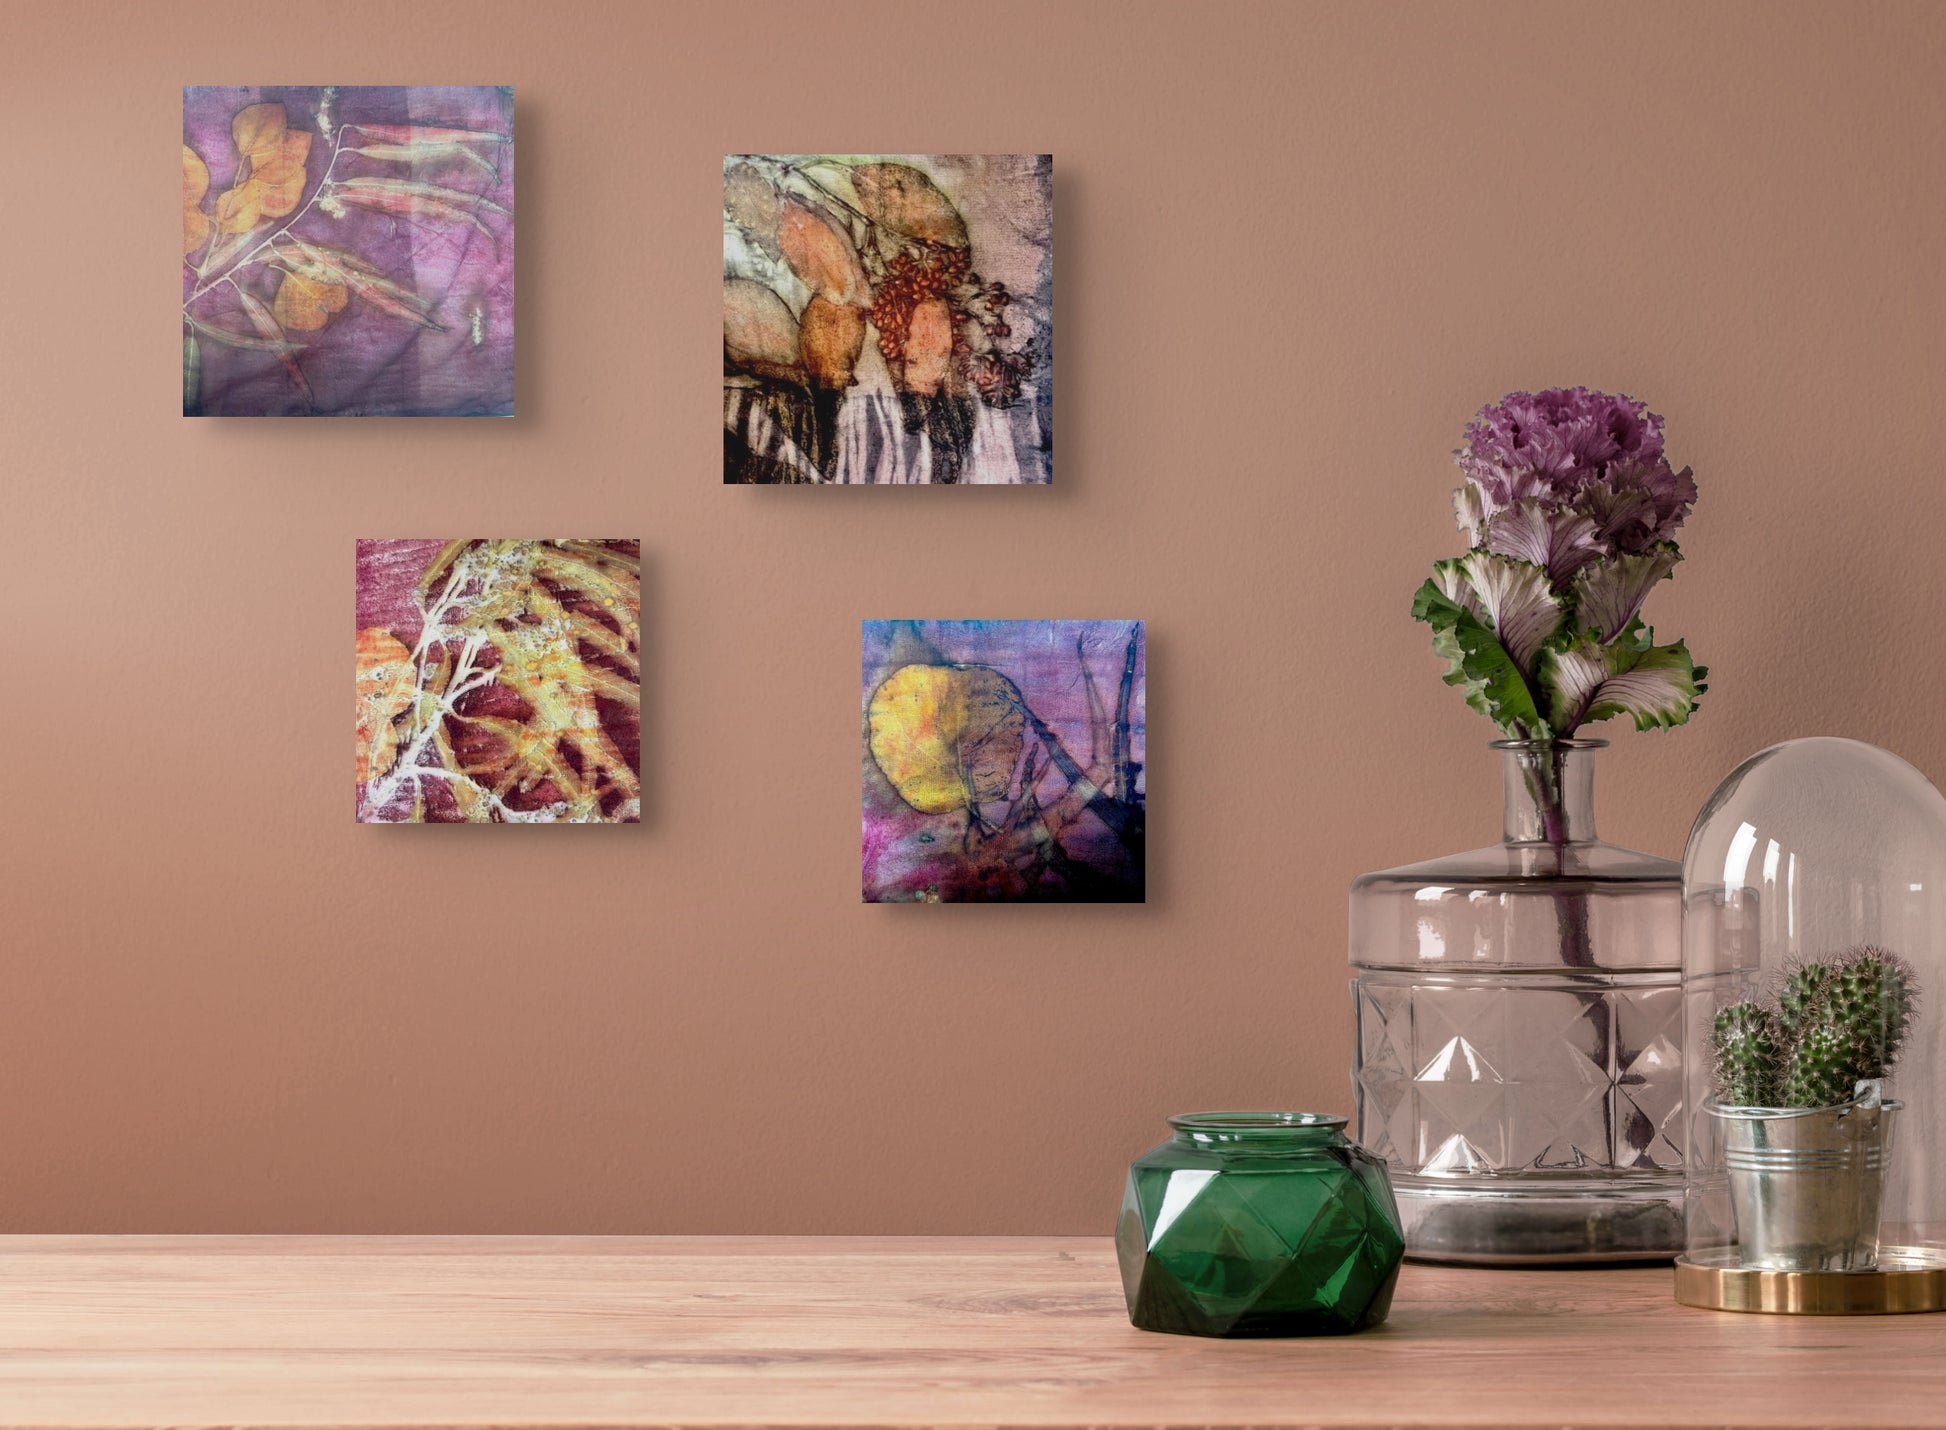 Series of four colorful blocks with colorful botanical prints; shown as a group hanging on wall in situ